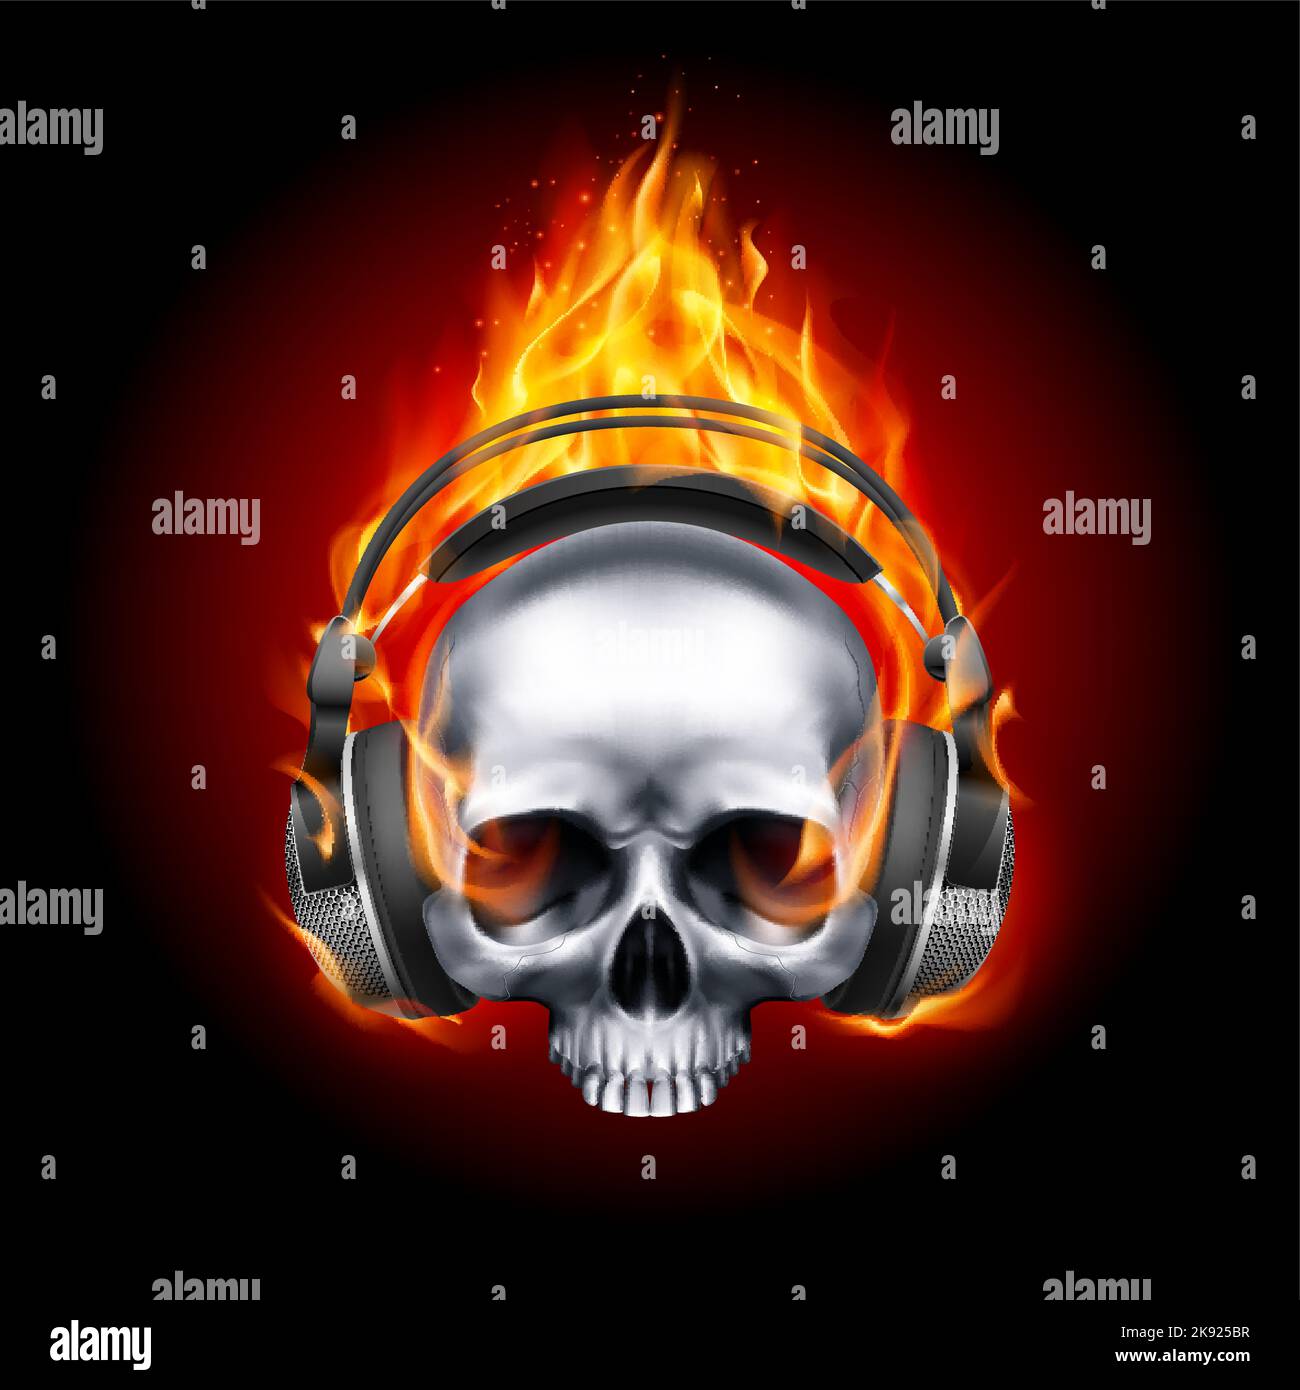 Flaming Metall Skull Music with Headphone or Human Skull Listening to Music Earphone Decorated at Halloween Party on Fire Stock Vector